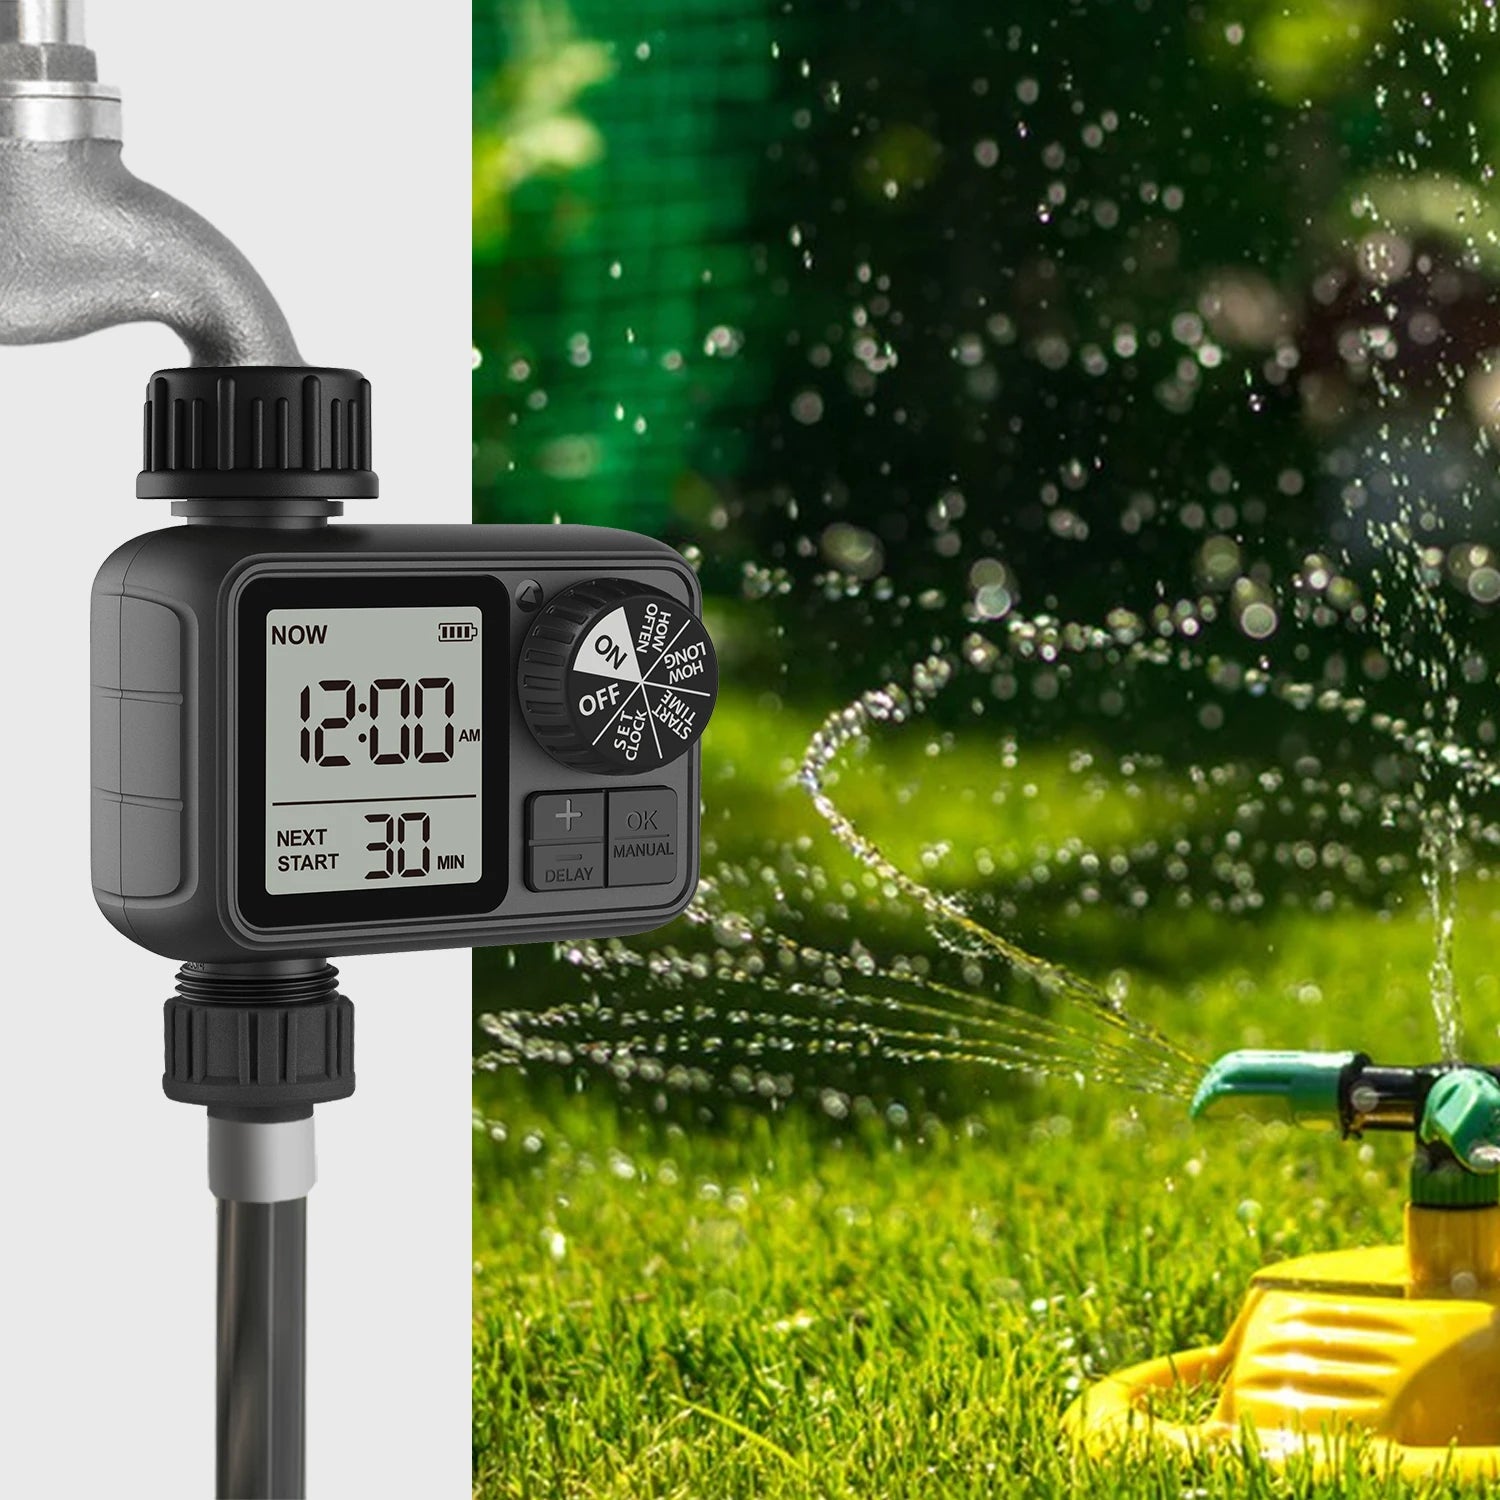 Eshico New Smart Dial & Button Water Timer M02 Automatic Timed Irrigation System Outdoor Home Garden Lawn Greenhouse Supplies